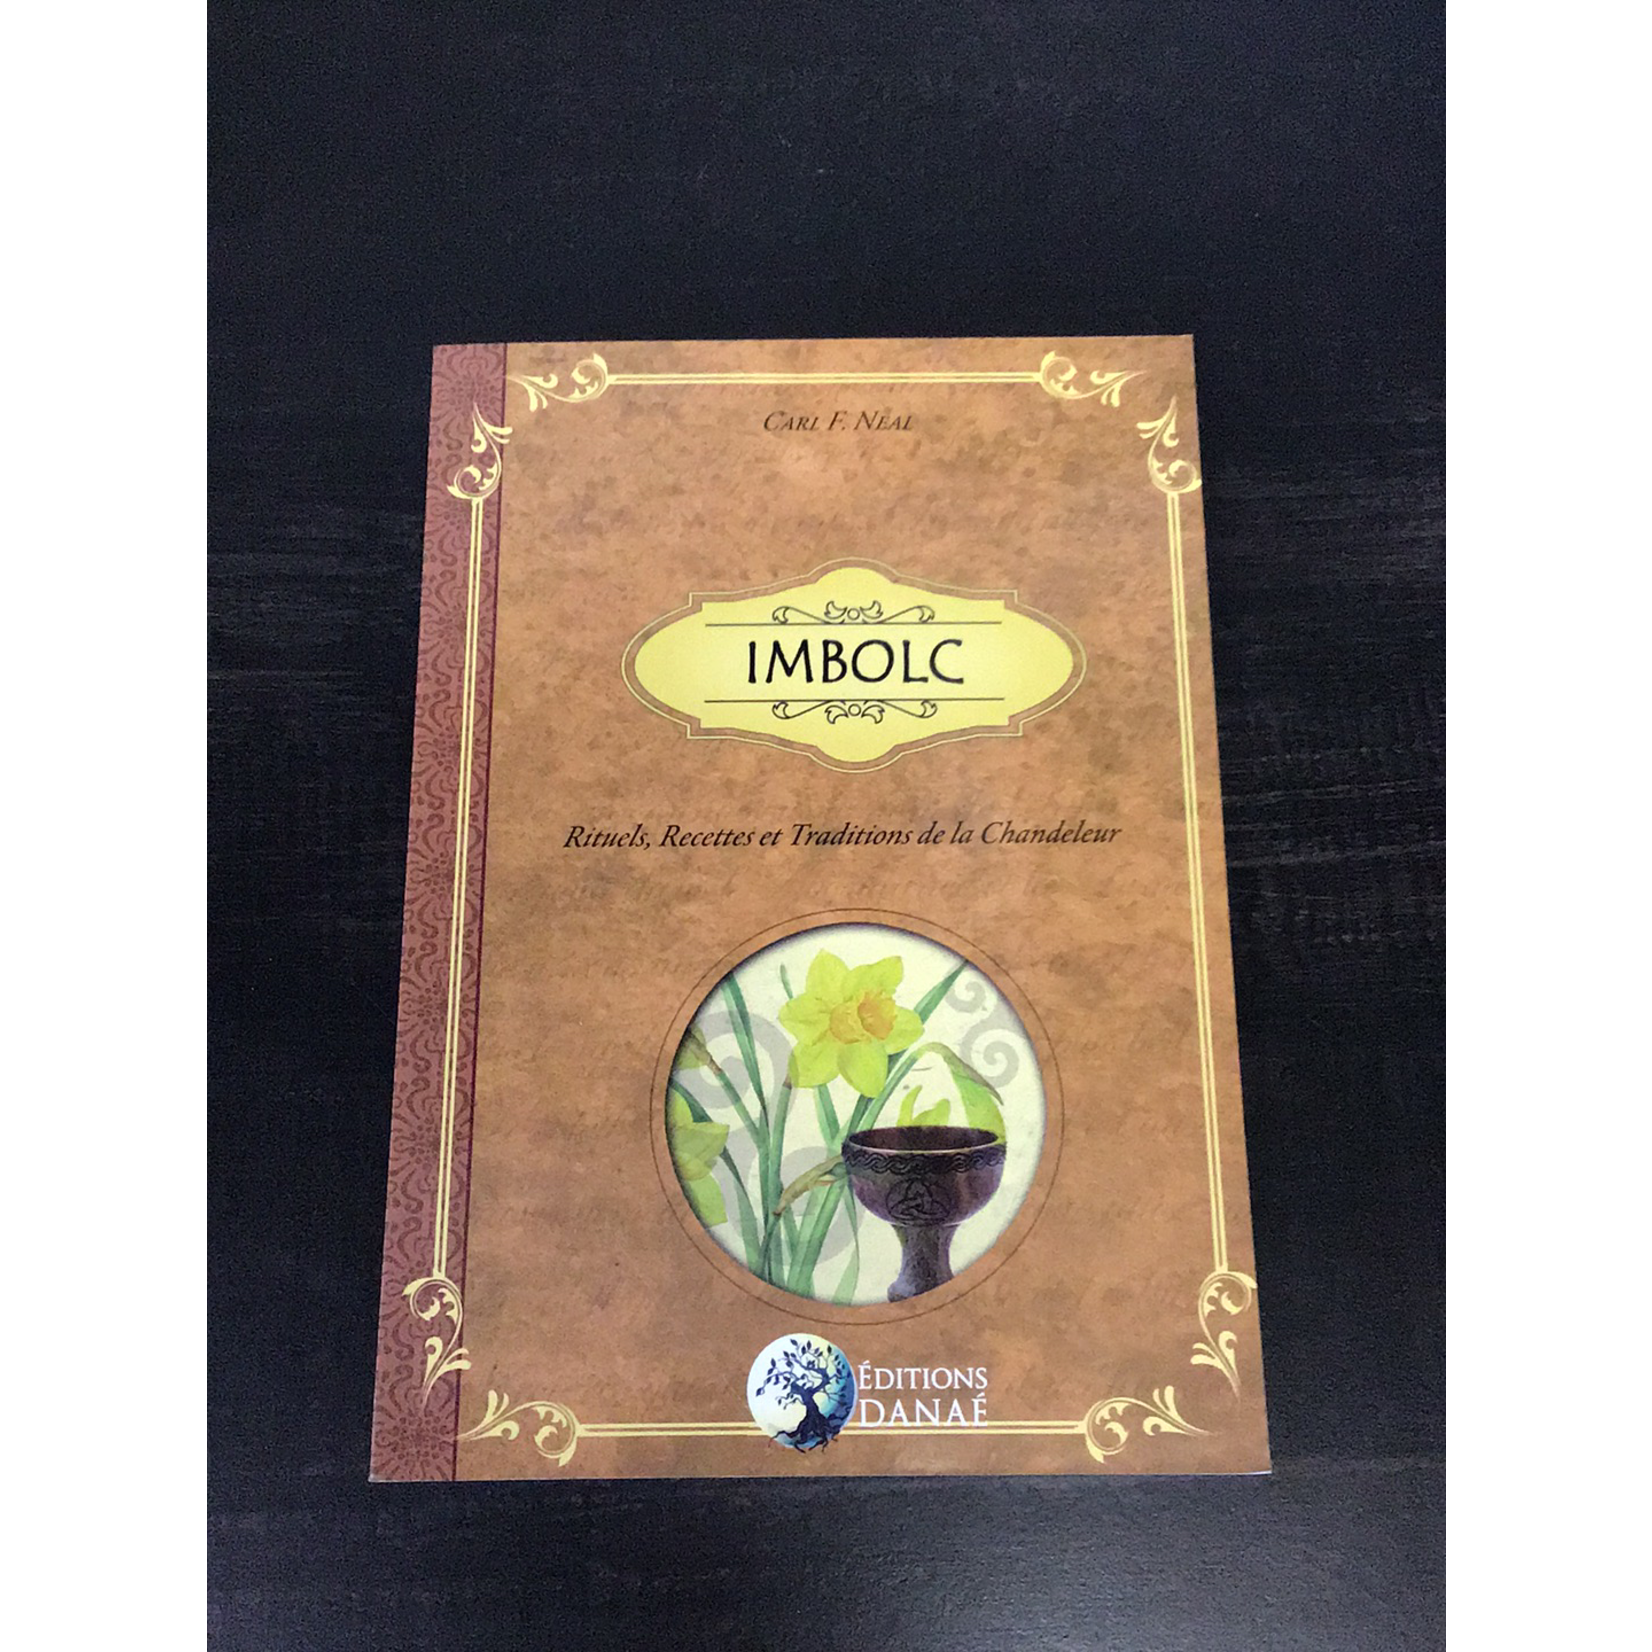 Imbolc - Rituels, Recettes et Traditions - Carl F. Neal